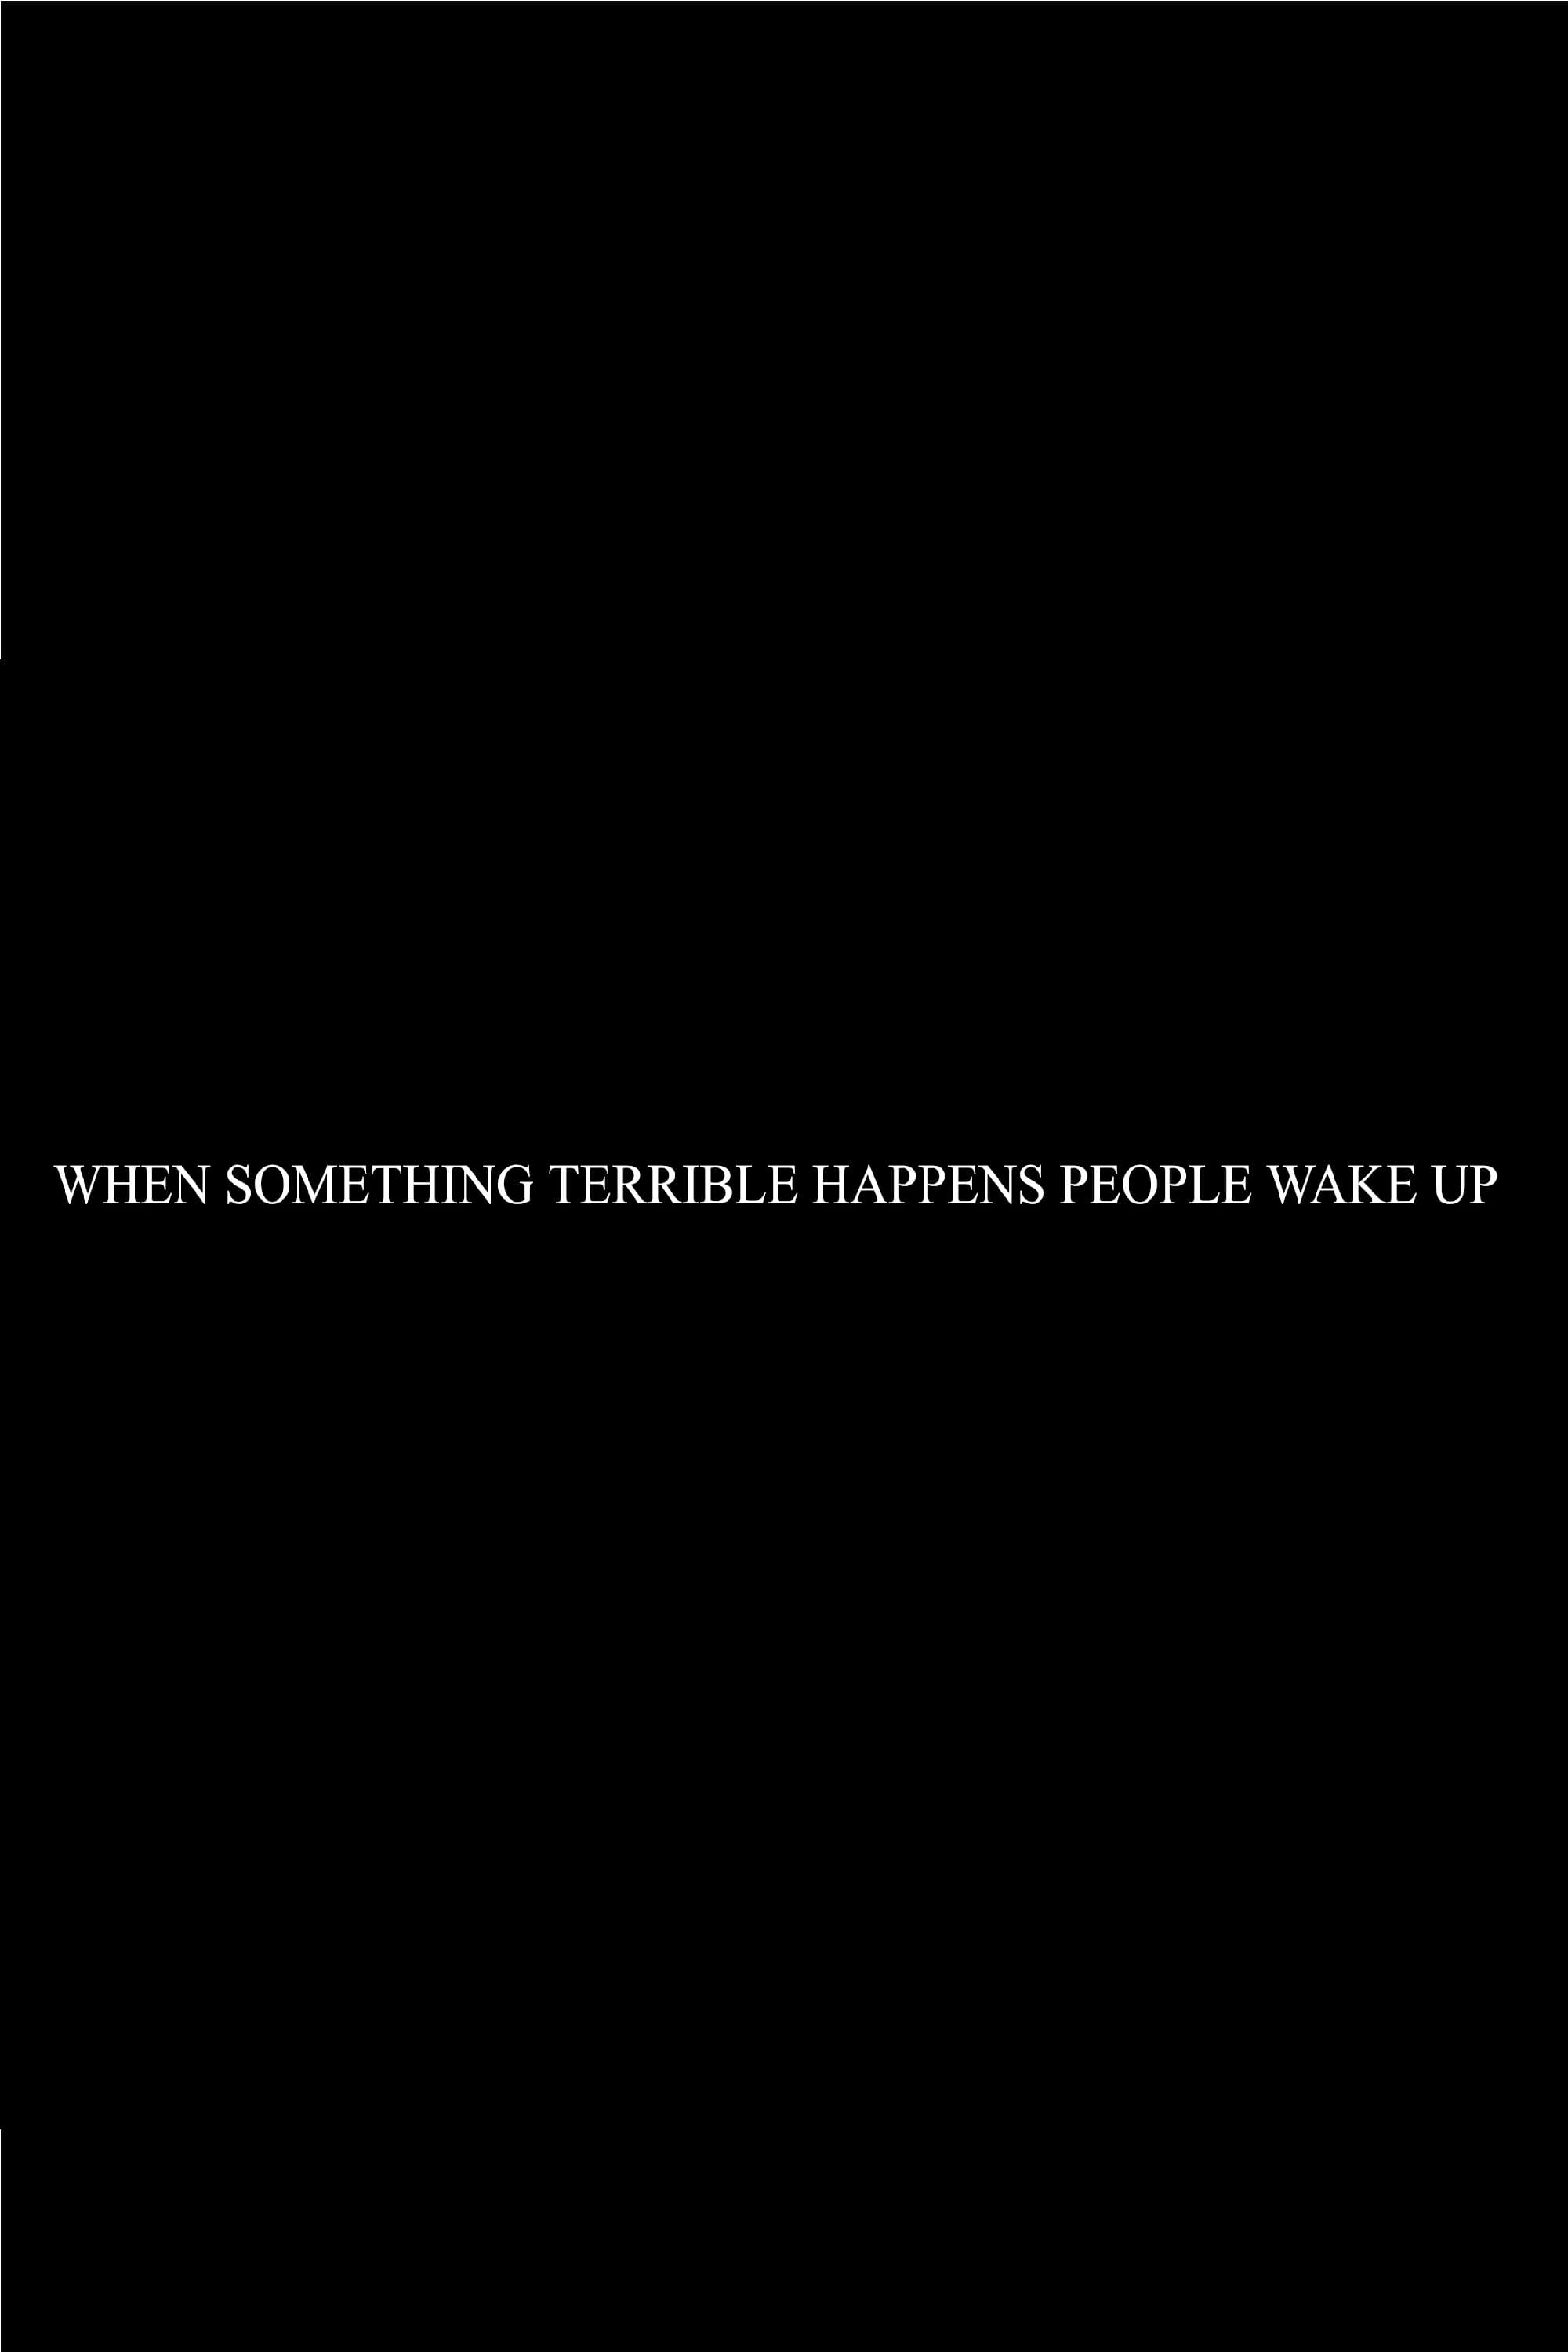 When Something Terrible Happens People Don't Wake Up